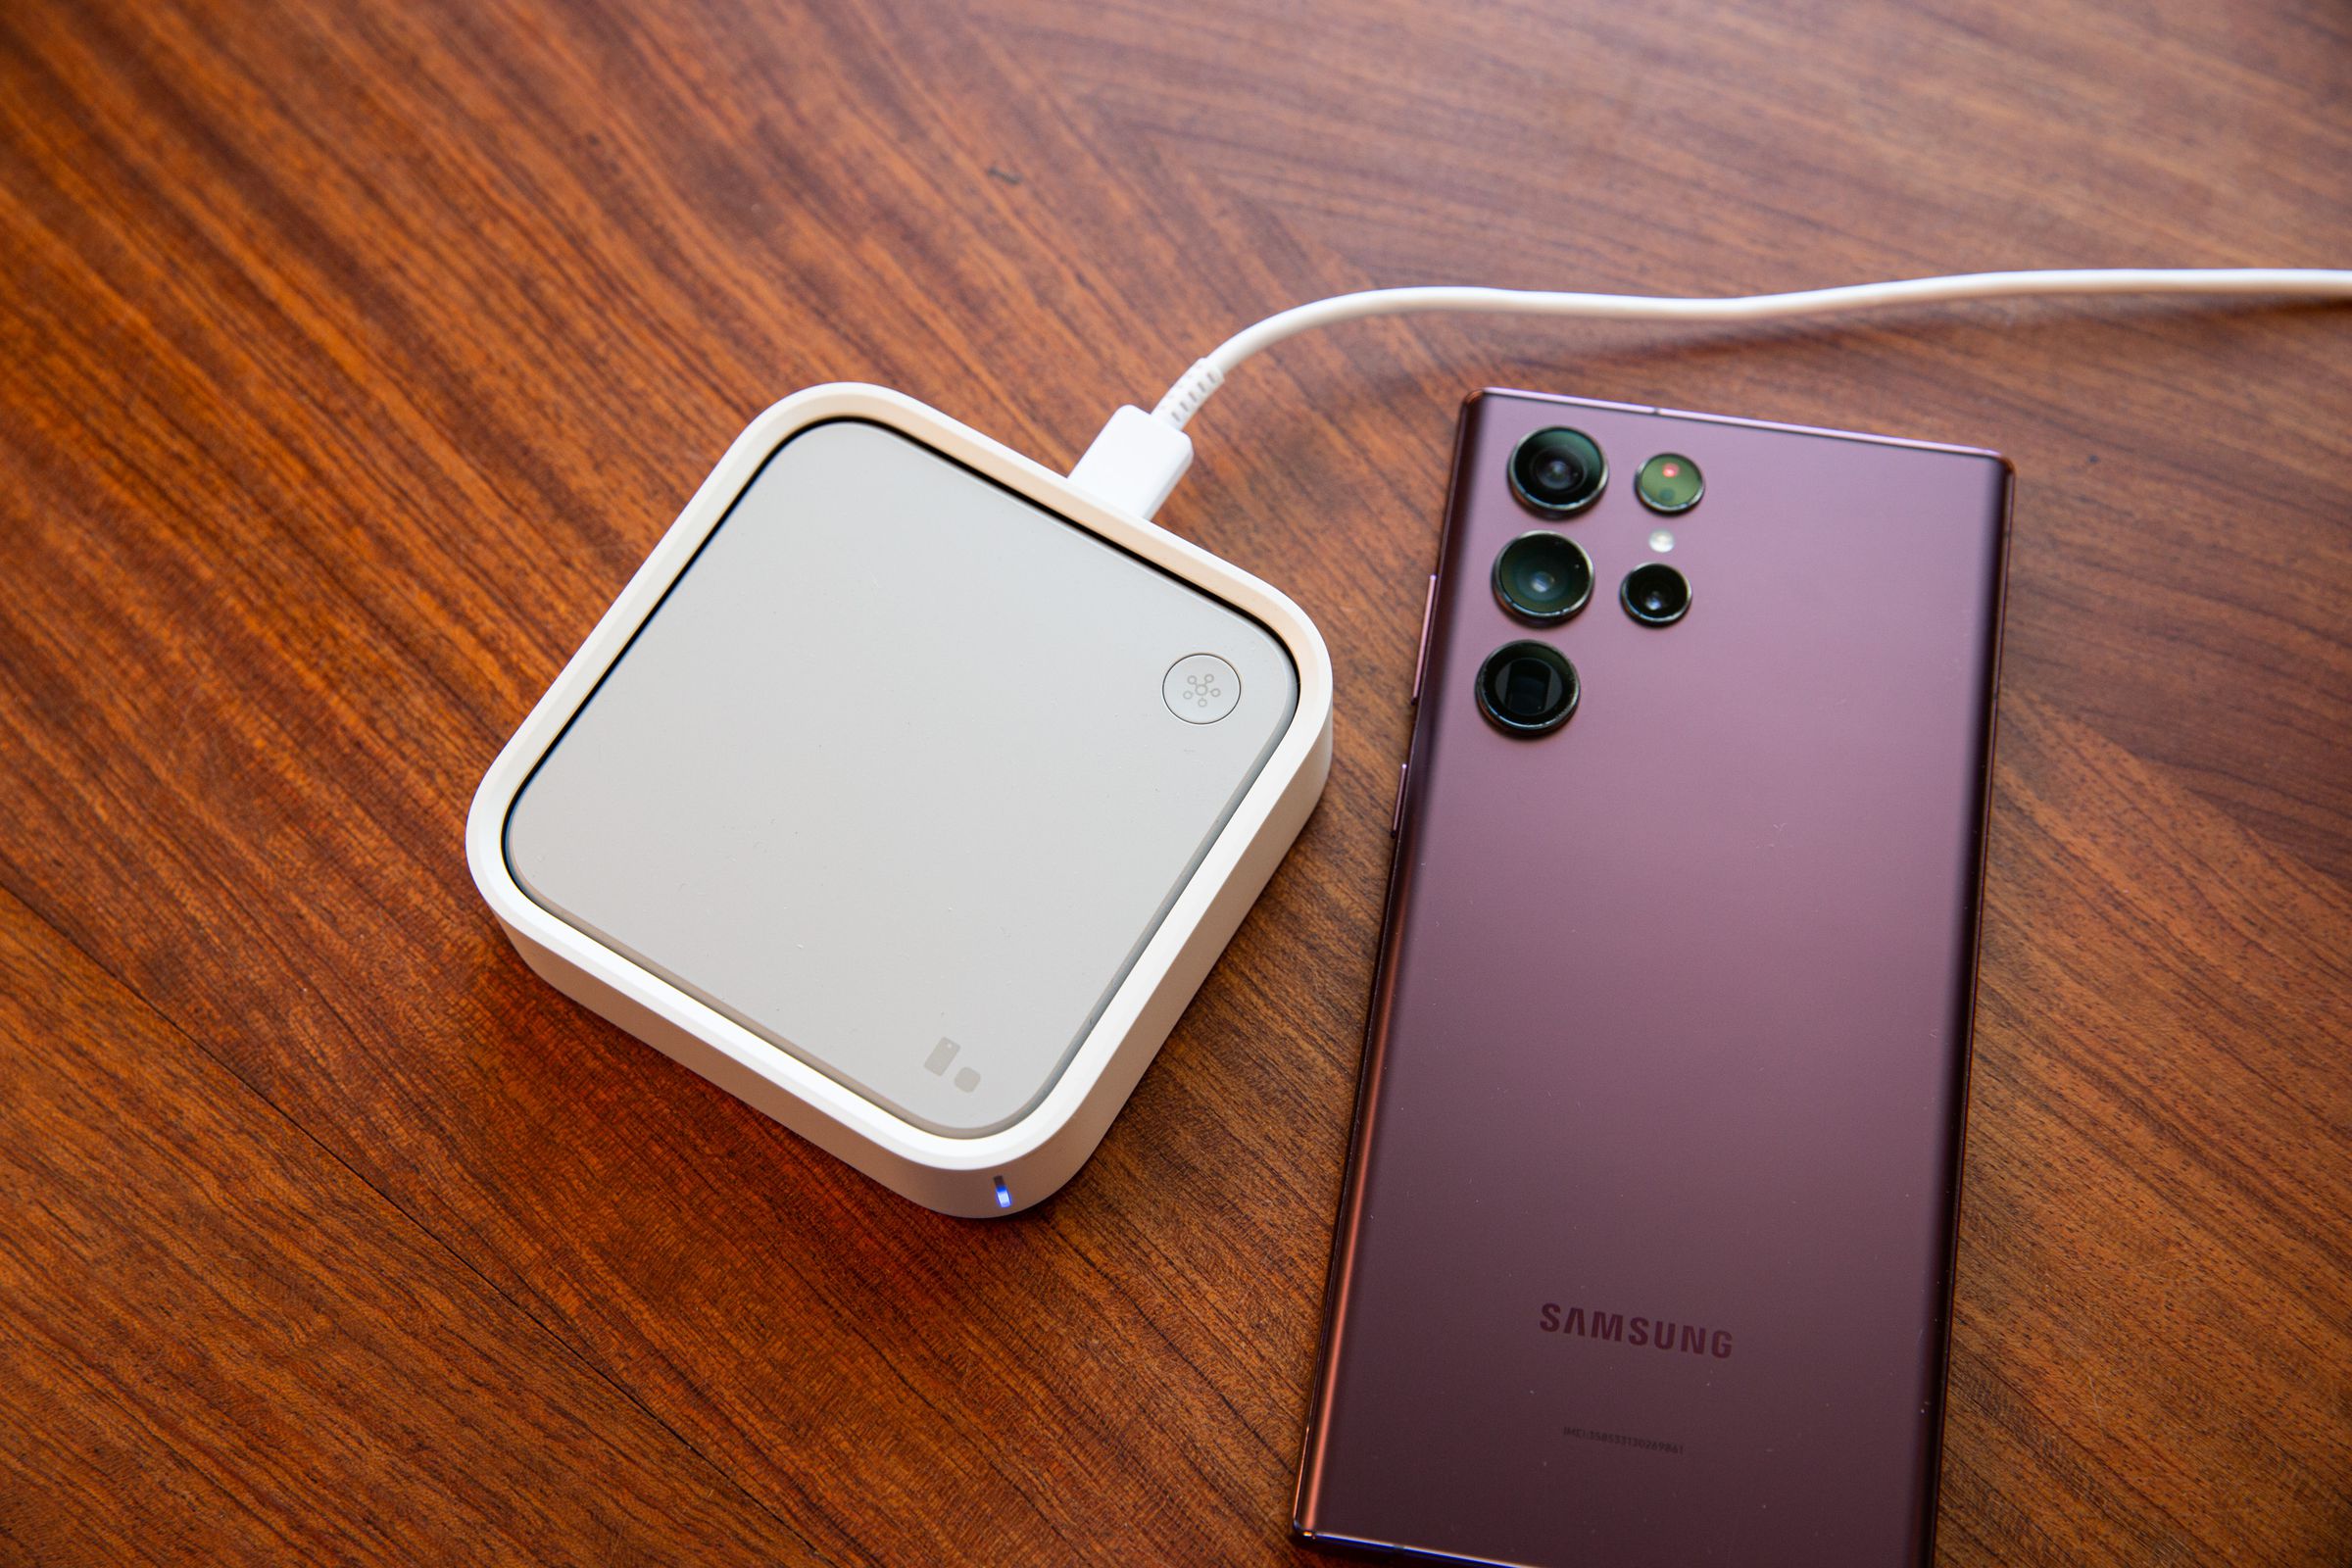 Square white SmartThings hub next to a smartphone.